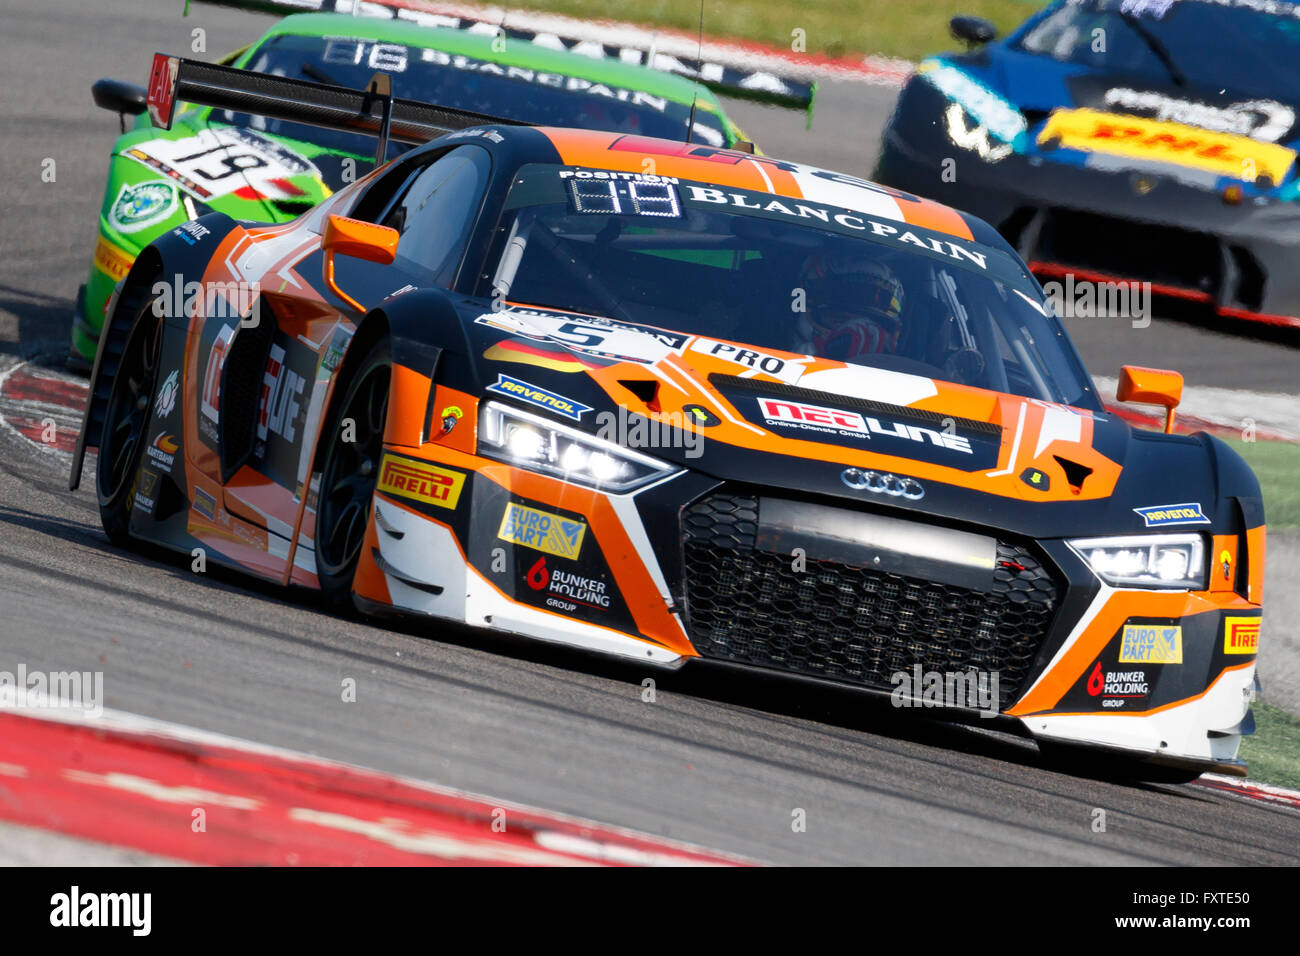 Misano Adriatico, Italy - April 10, 2016: Audi R8 LMS of Phoenix Racing Team, driven by Nicolaj Møller Madsen and Markus Pommer, the Blancpain GT Series Sprint Cup in Misano World Circuit. Stock Photo